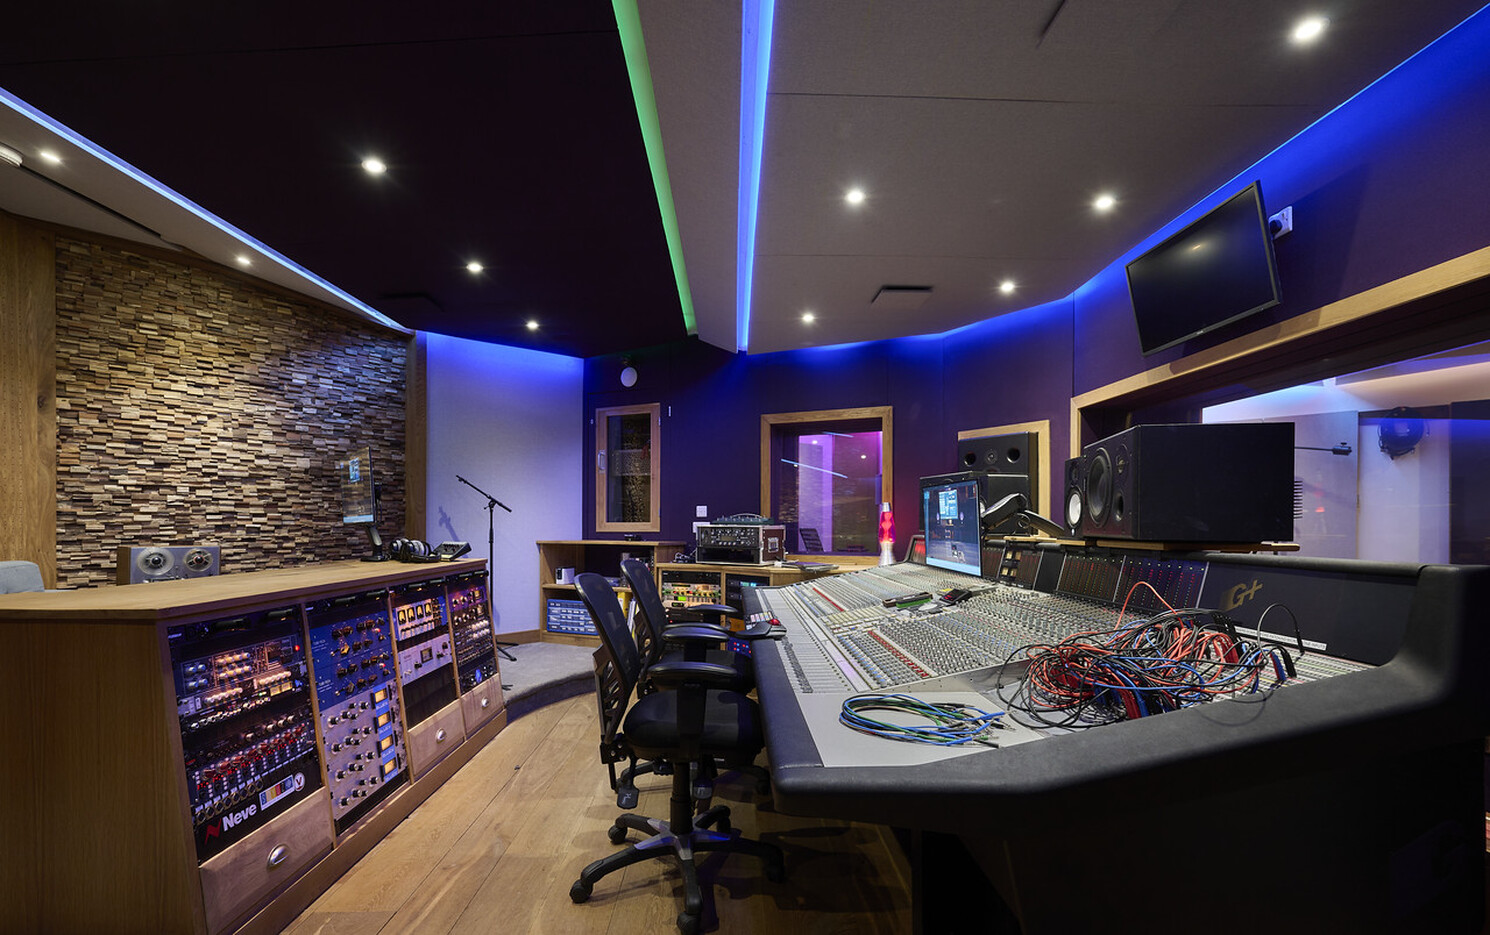 Are Friends Electric studio control room and SSL photos